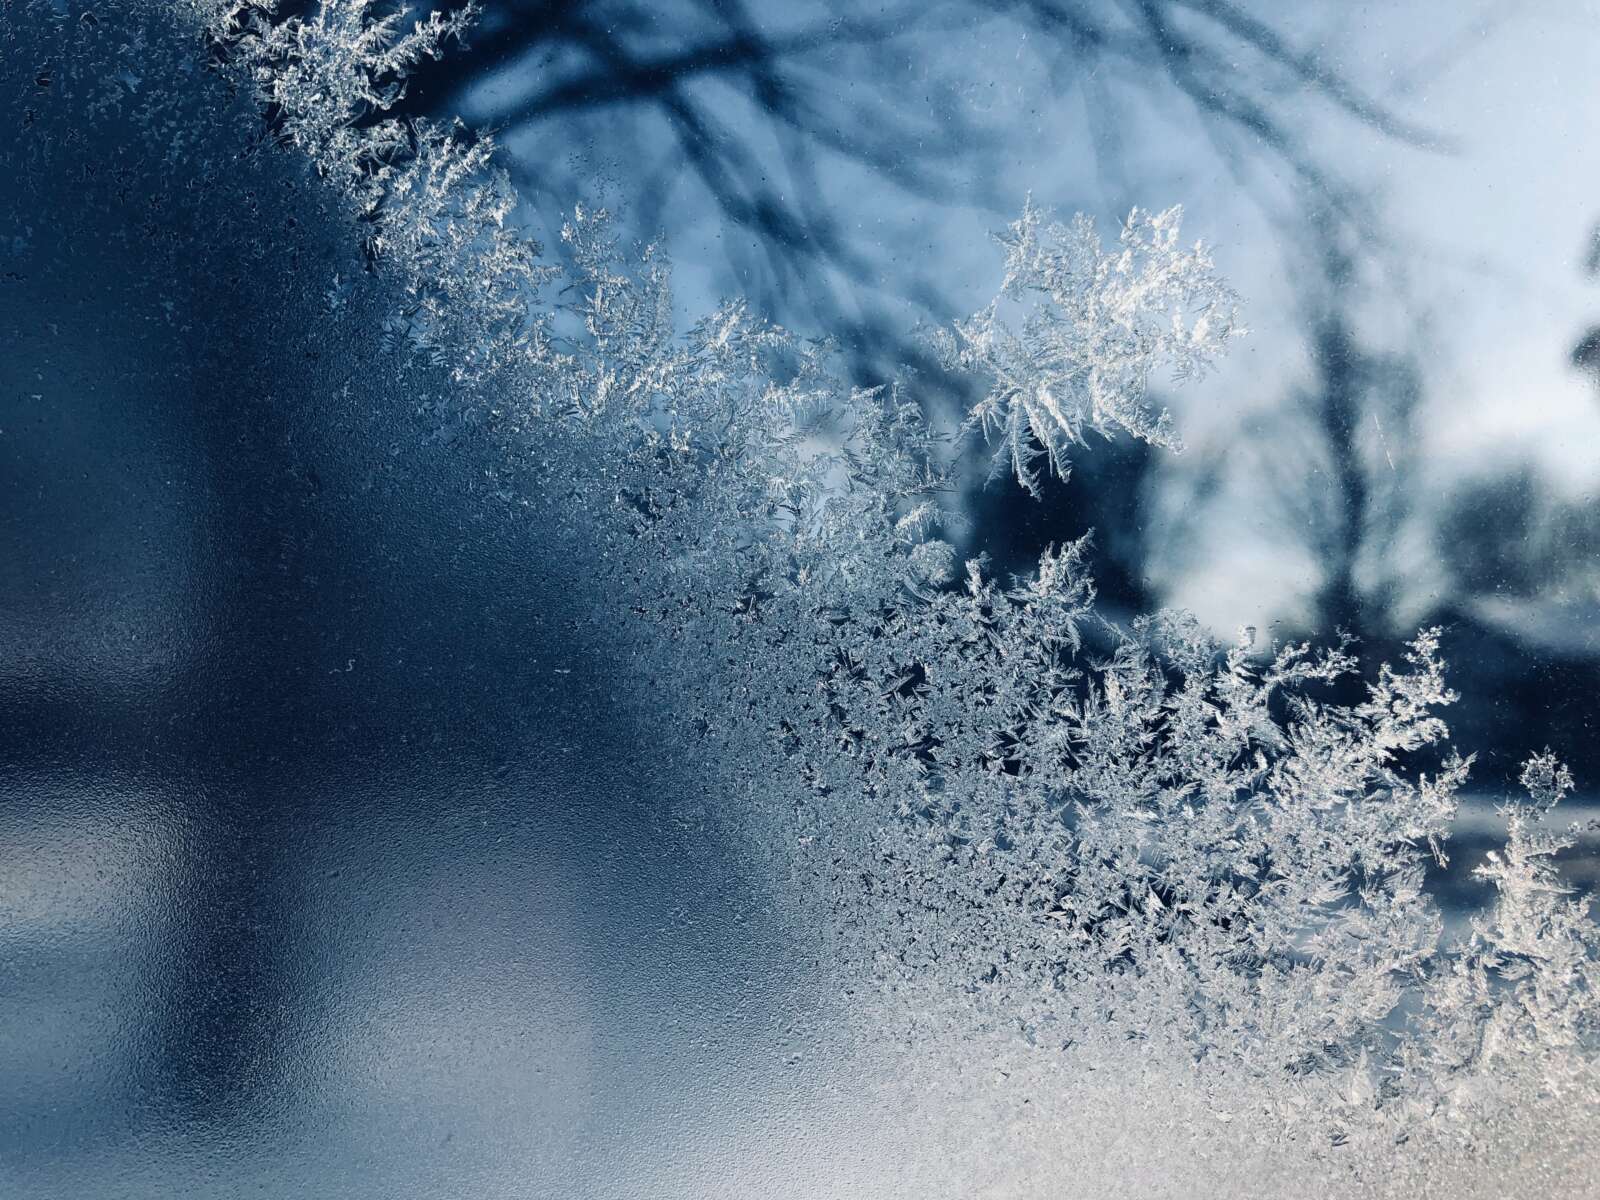 Frost Advisory issued for Fairfax County early Wednesday morning